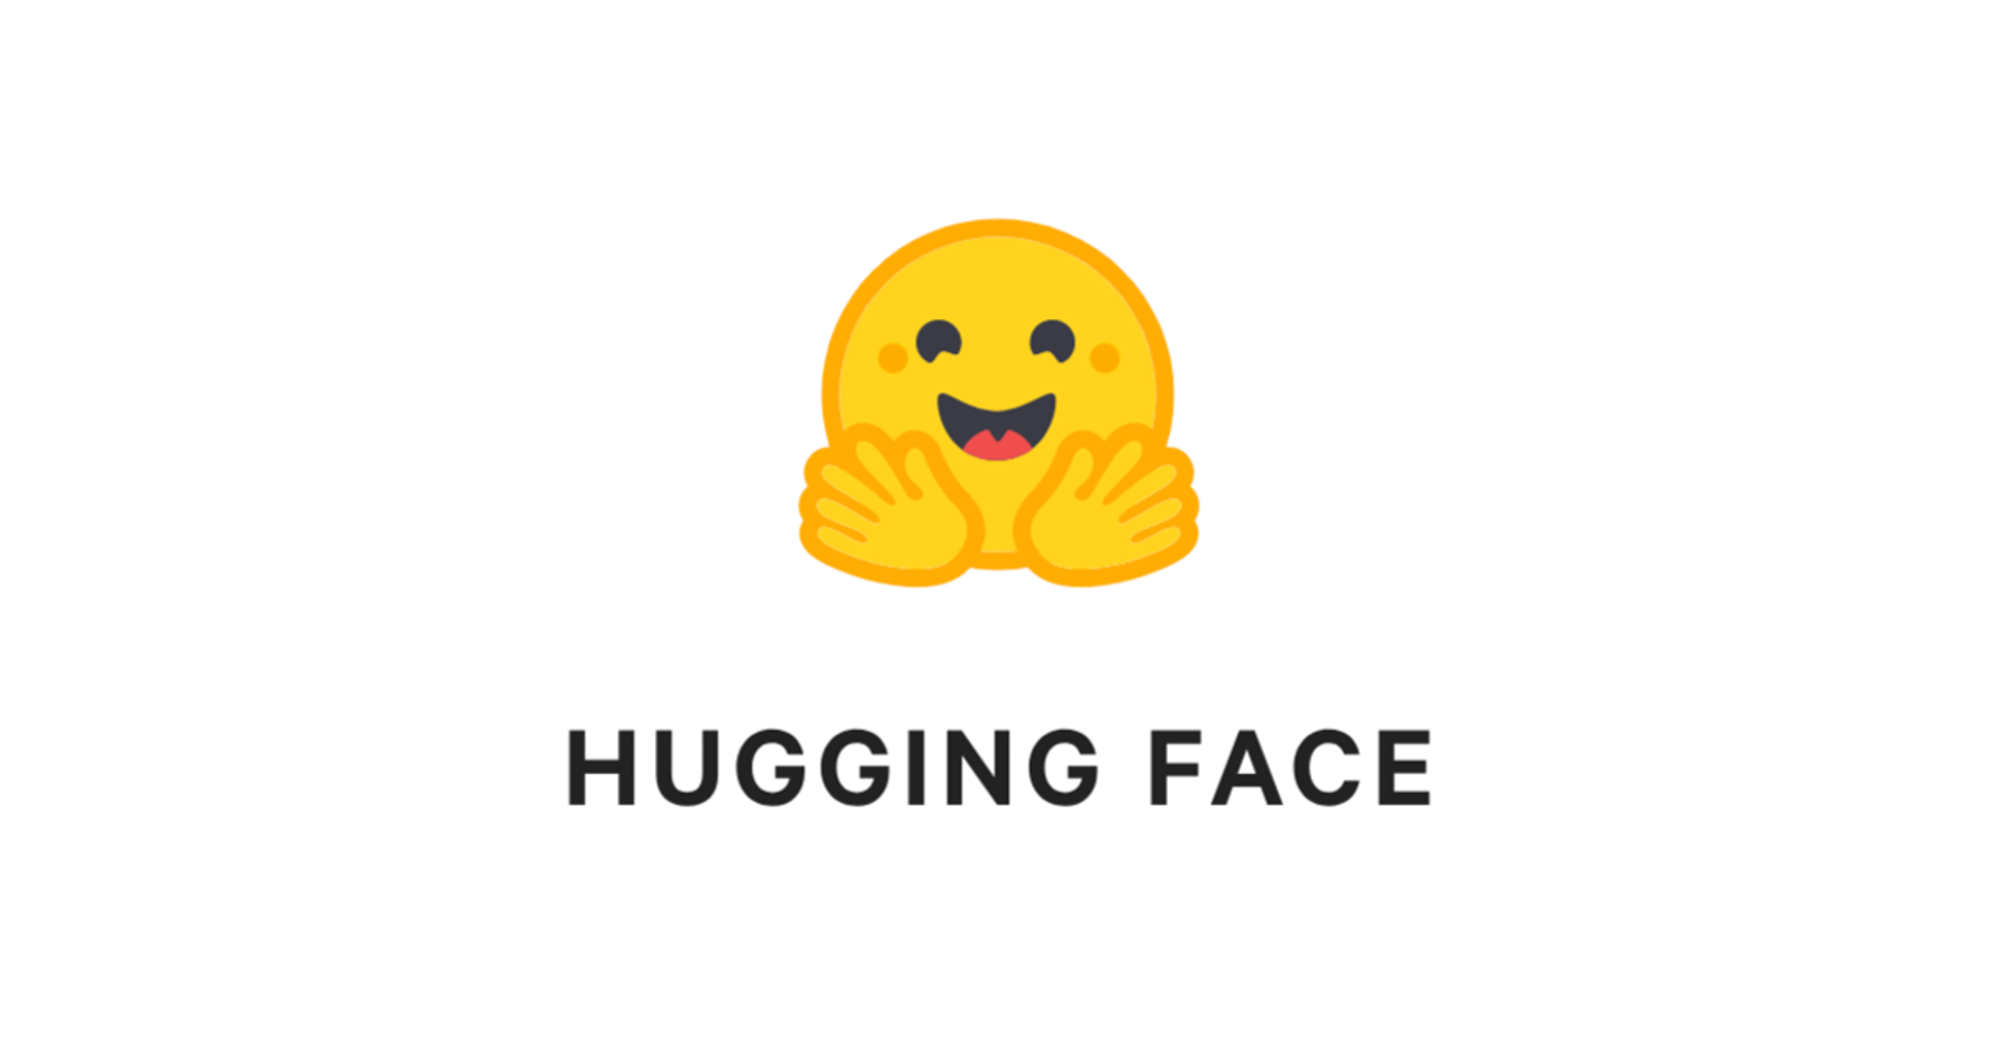 How to create a Hugging Face dataset